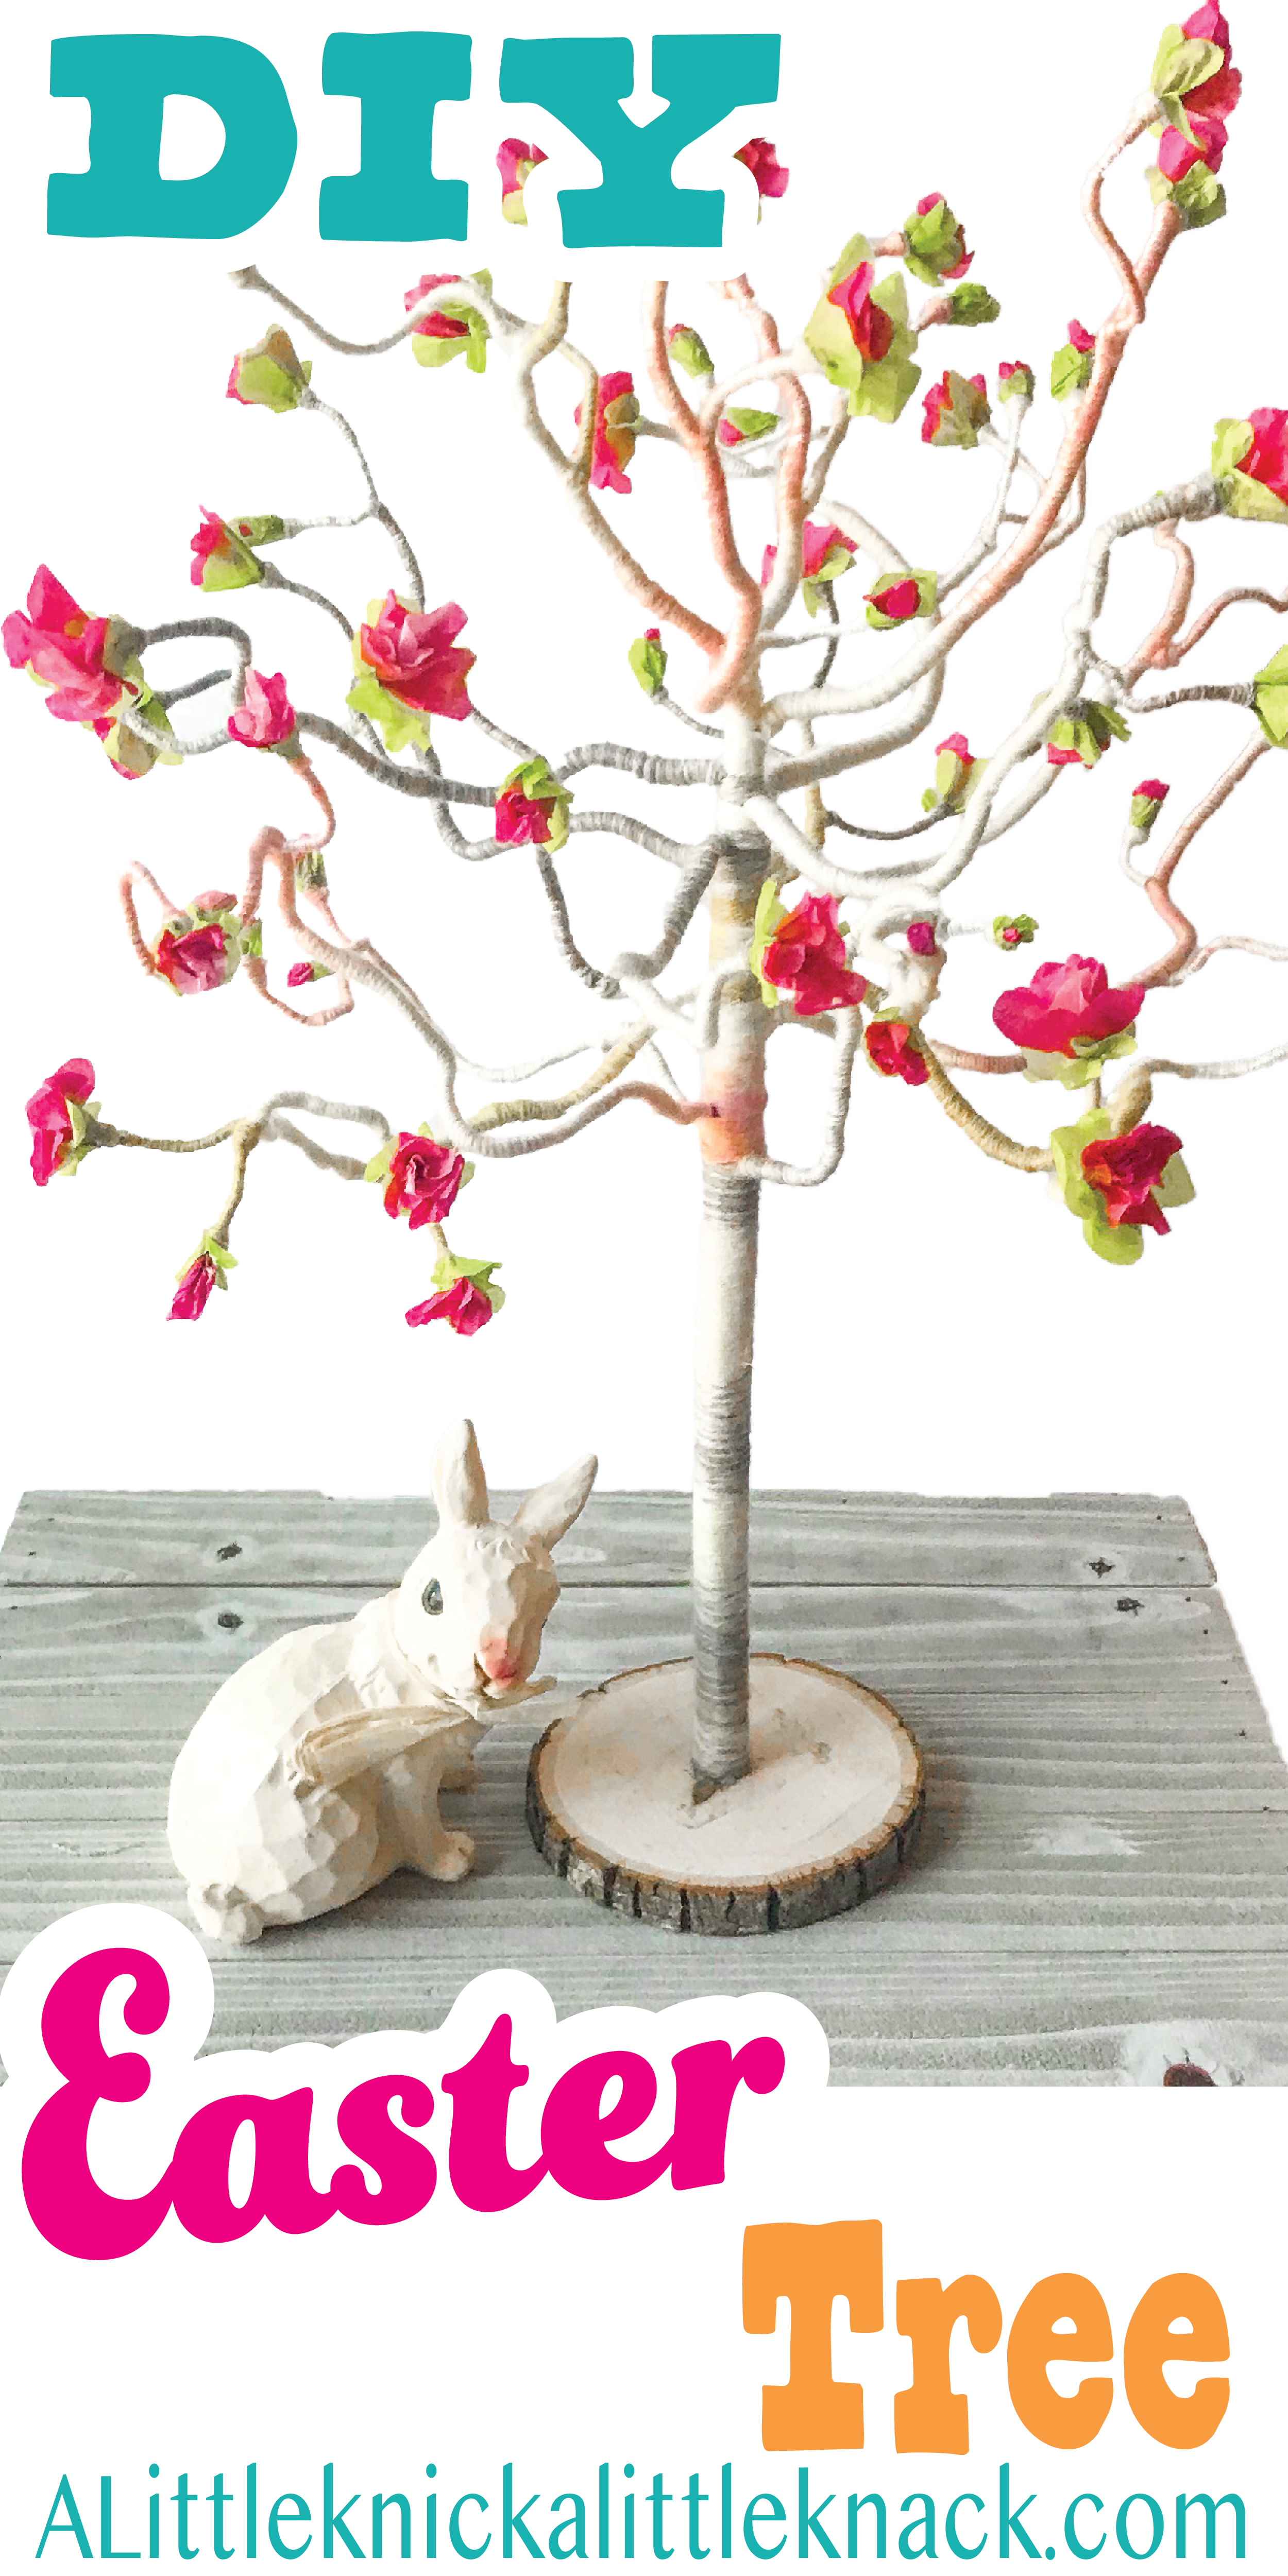 Make decorating your Easter tree a yearly Easter tradition with this fun spring tree DIY. #springDIY